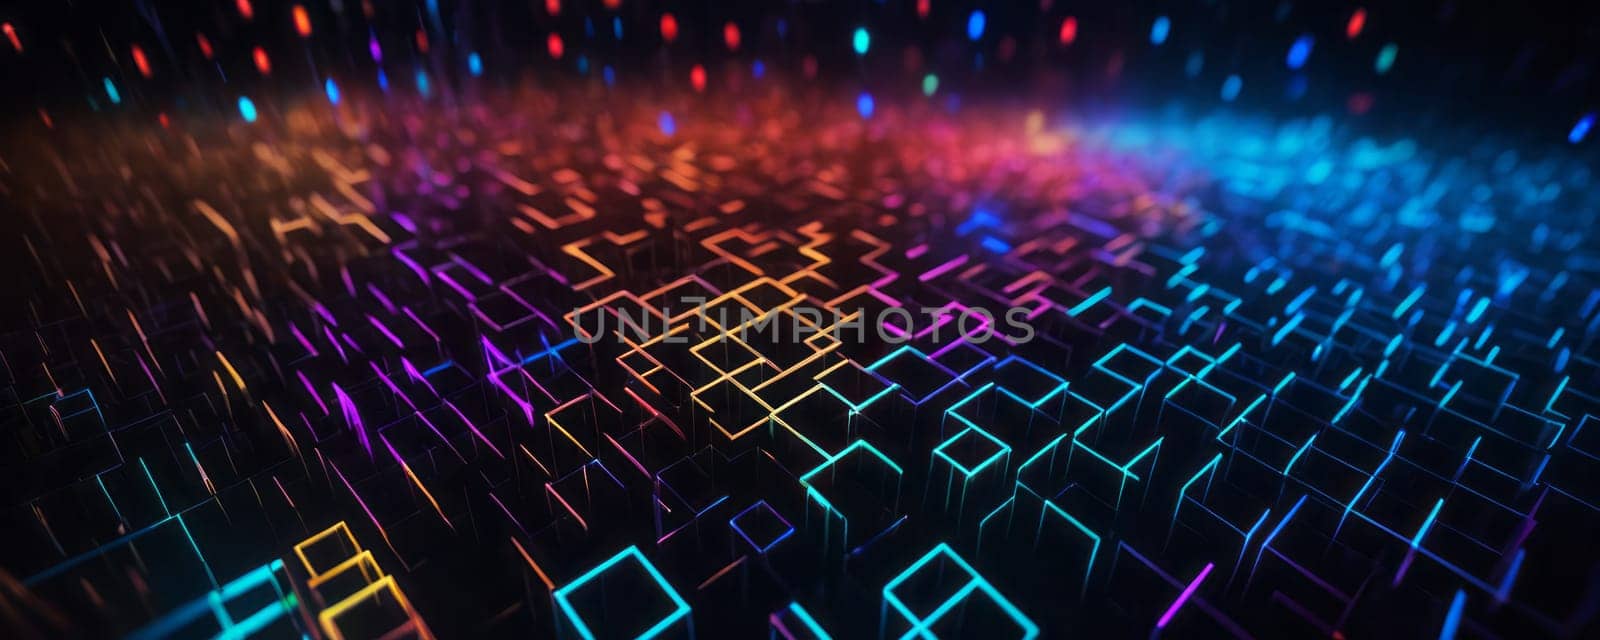 The image displays a dynamic and colorful digital landscape made of geometric shapes, specifically squares and rectangles. The shapes are outlined, creating a grid-like pattern across the image. There is a vibrant mix of colors including blue, red, purple, and yellow illuminating the outlines of the shapes. The colors create a gradient effect from one side of the image to the other, giving depth and dimension to the scene. Generative AI